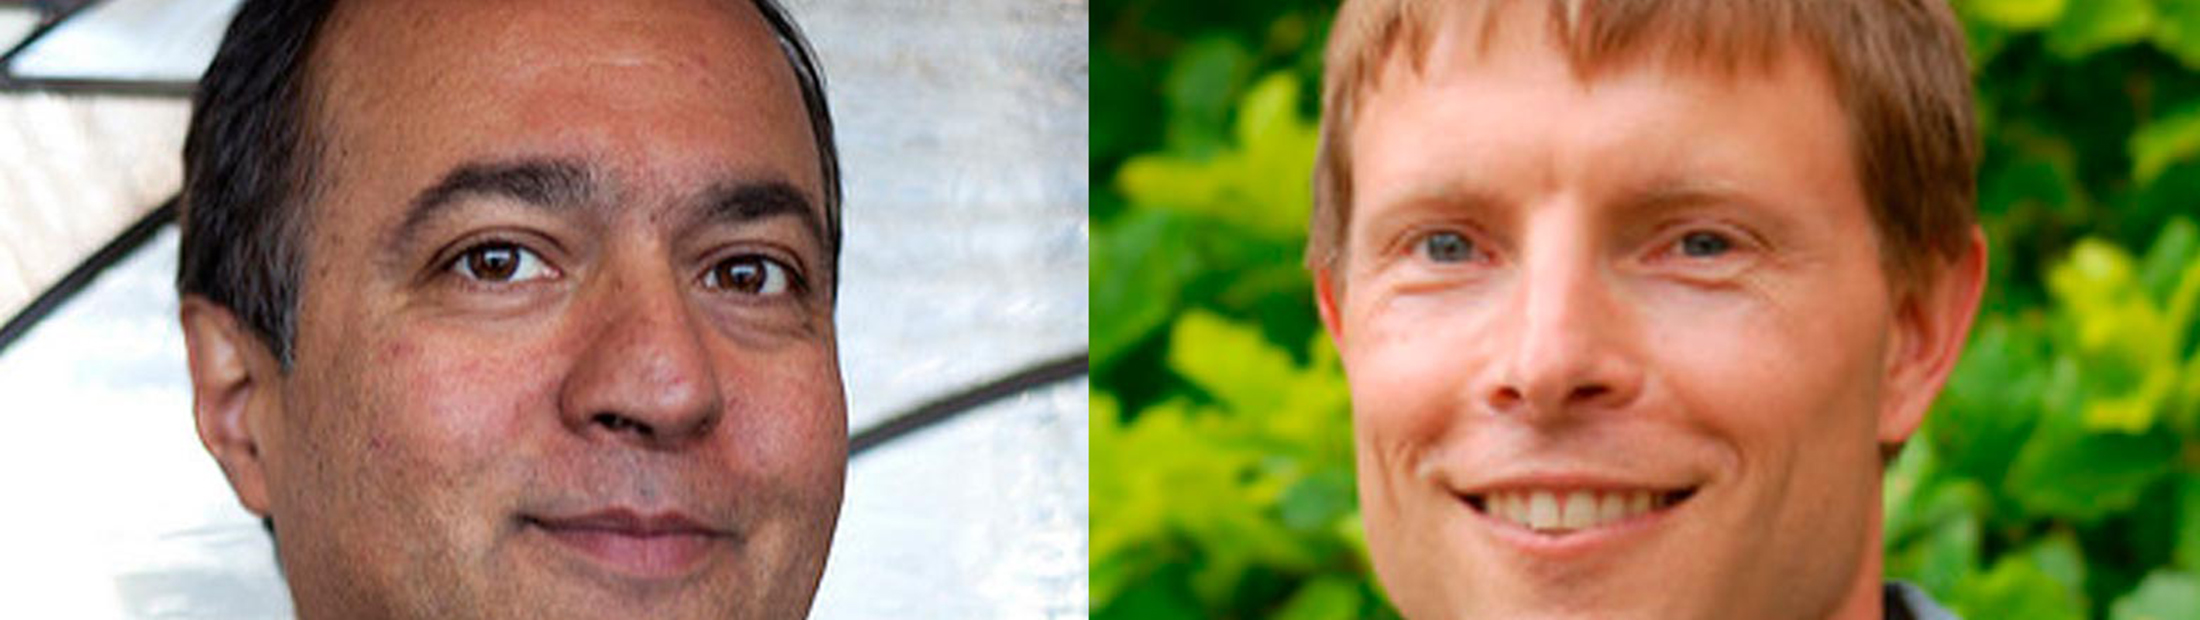 Side-by-side photos of Professors H. V. Jagadish and Christopher Poulsen